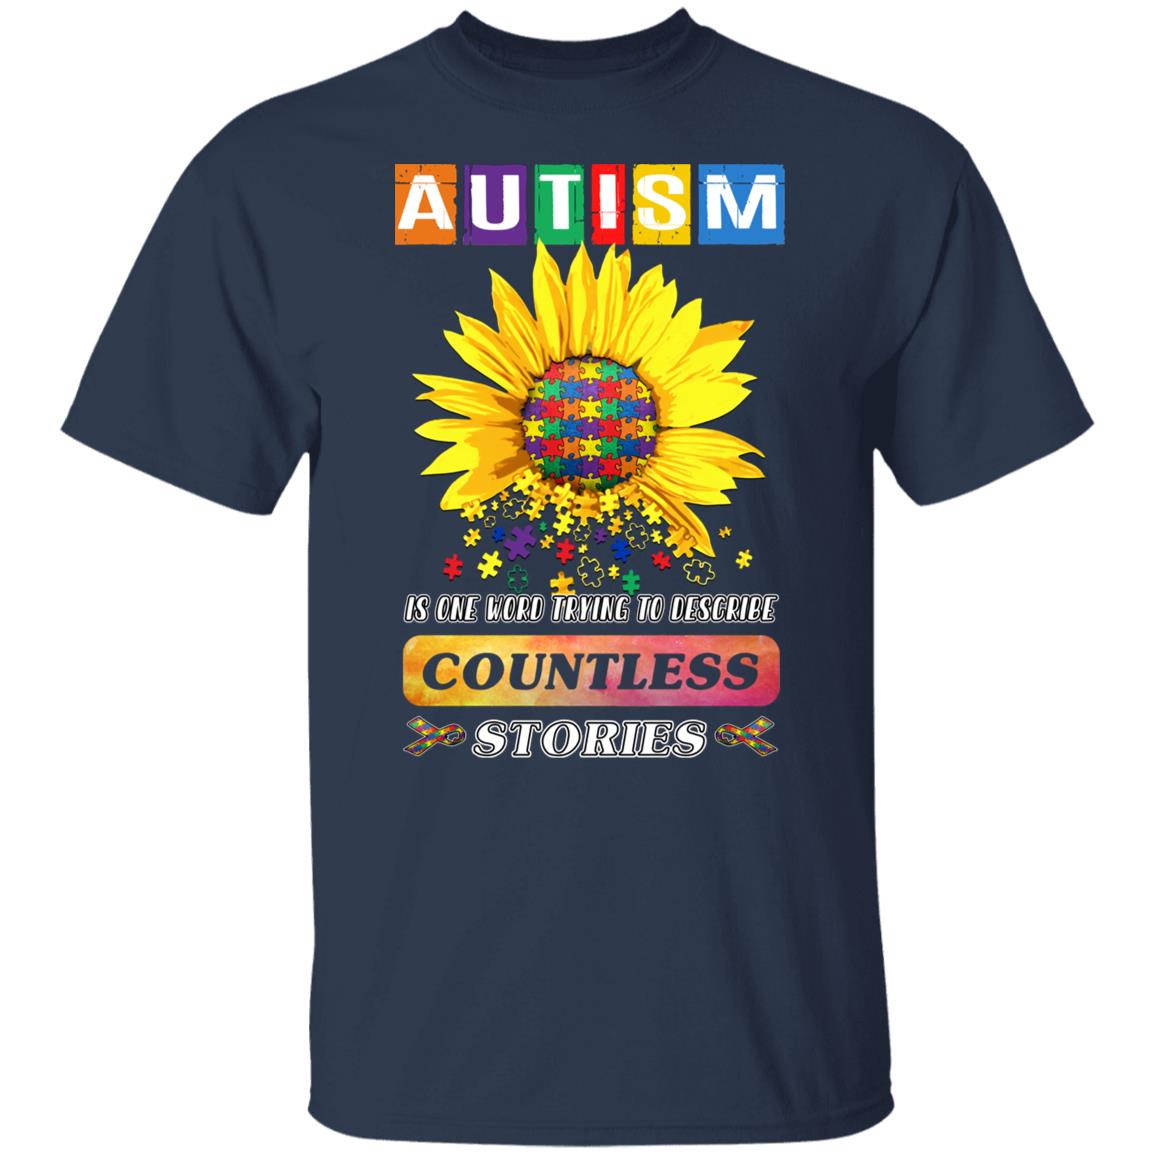 Autism is one word trying to describe countless stories shirt